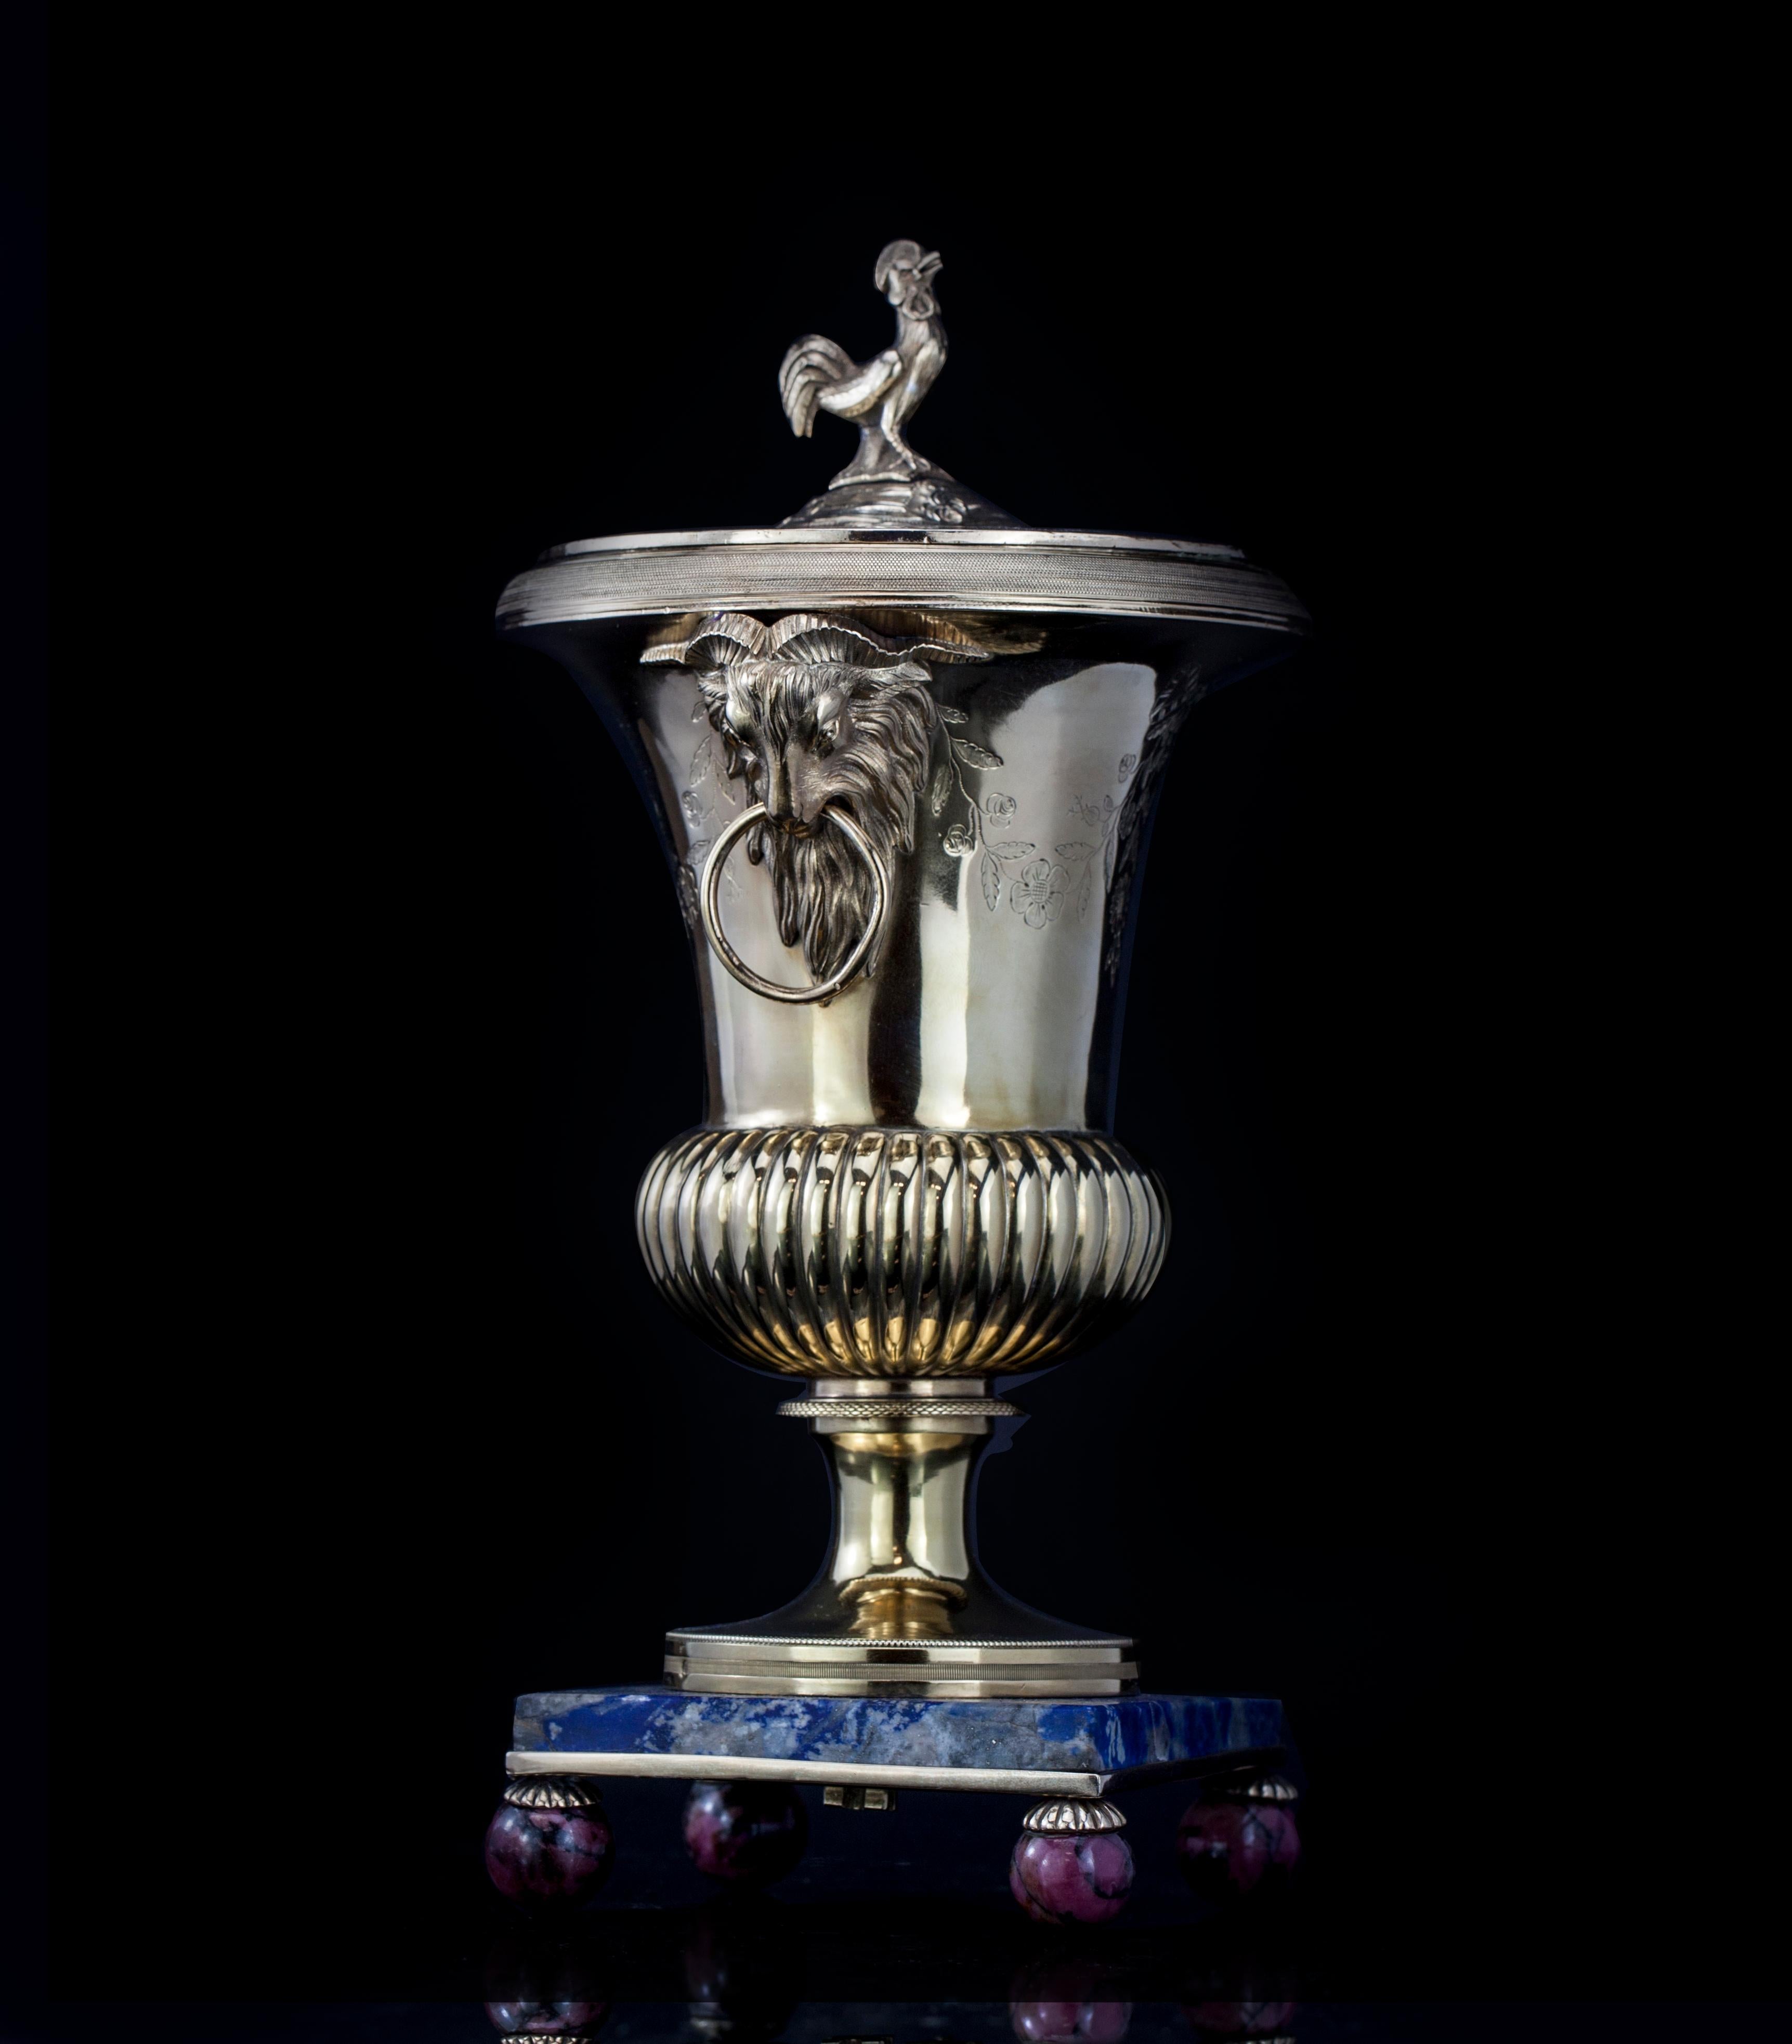 Antique French silver gilt urn with rooster lid
Mounted in Lapis Lazuli base with Rhodonite legs
Maker: N.M.R
Made in France, 1875-1915
Fully hallmarked.

Dimensions:
Approximate diameter x height 12 x 24.5 cm
Weight: 895 grams

Condition